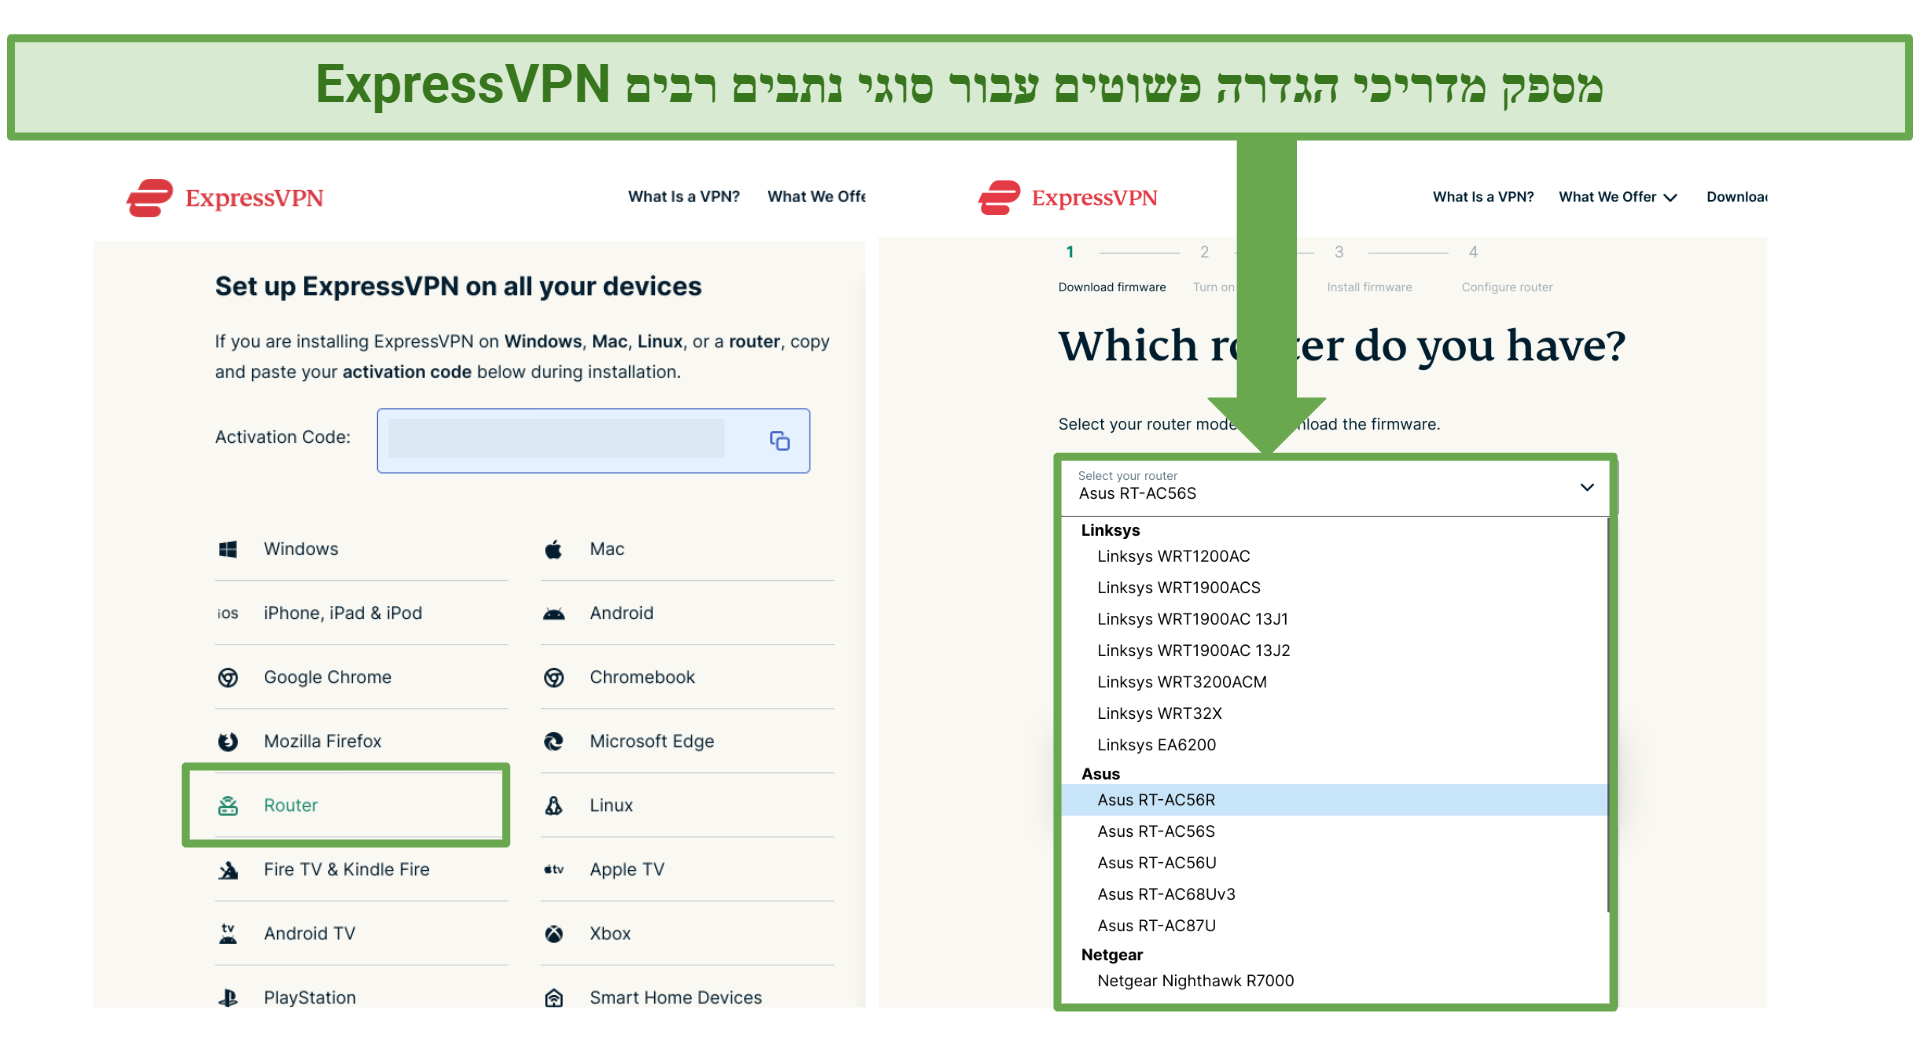 Screenshot of ExpressVPN's download page leading to setup guide for router